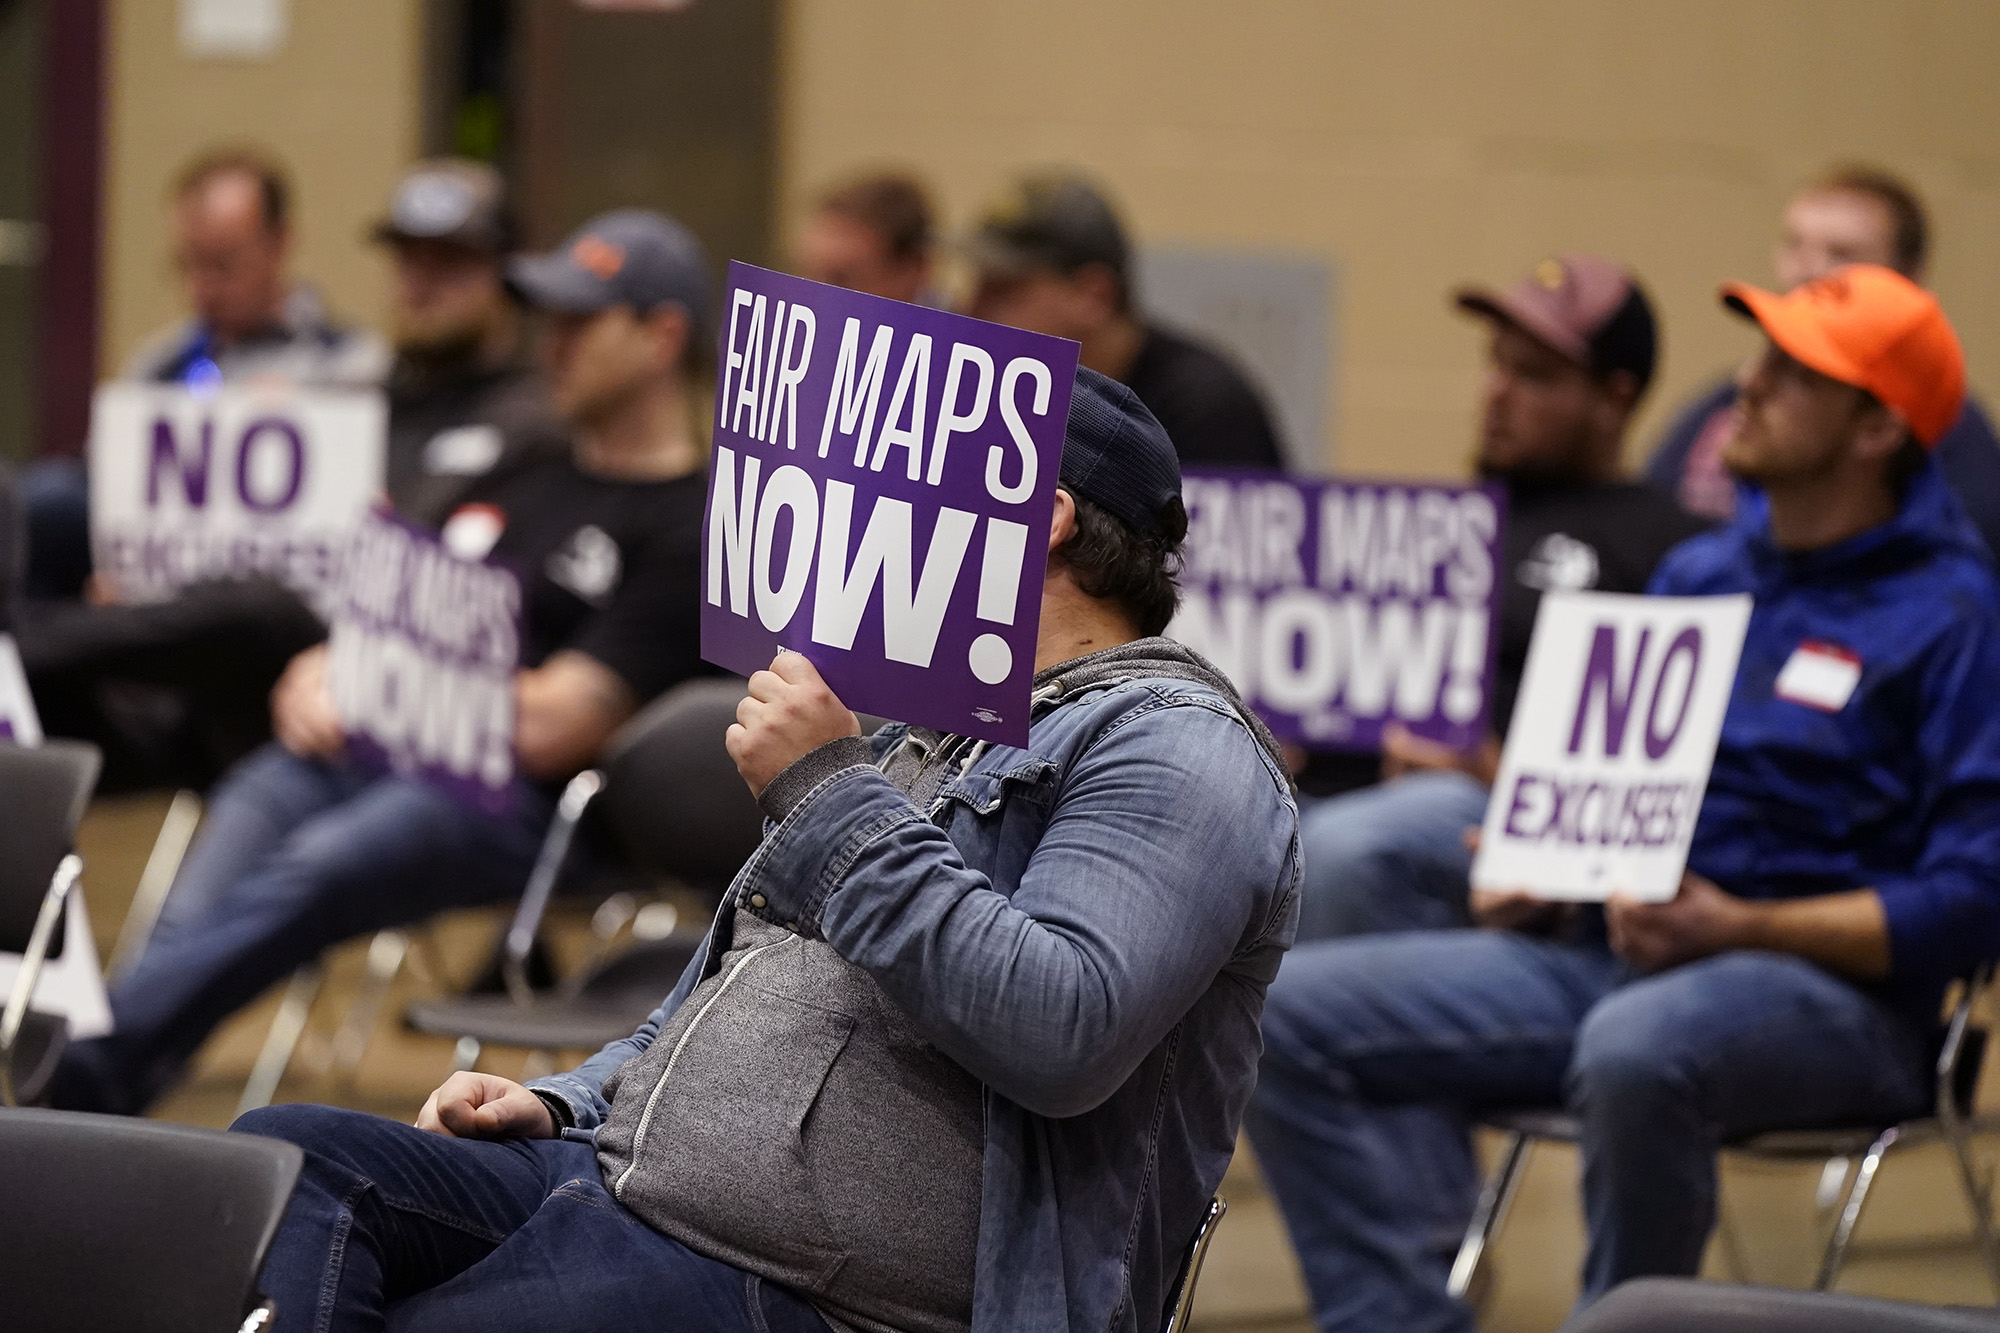 Protesters attend a meeting of Michigan's new Independent Citizens Redistricting Commission in Lansing, Mich., on Oct. 21, 2021.